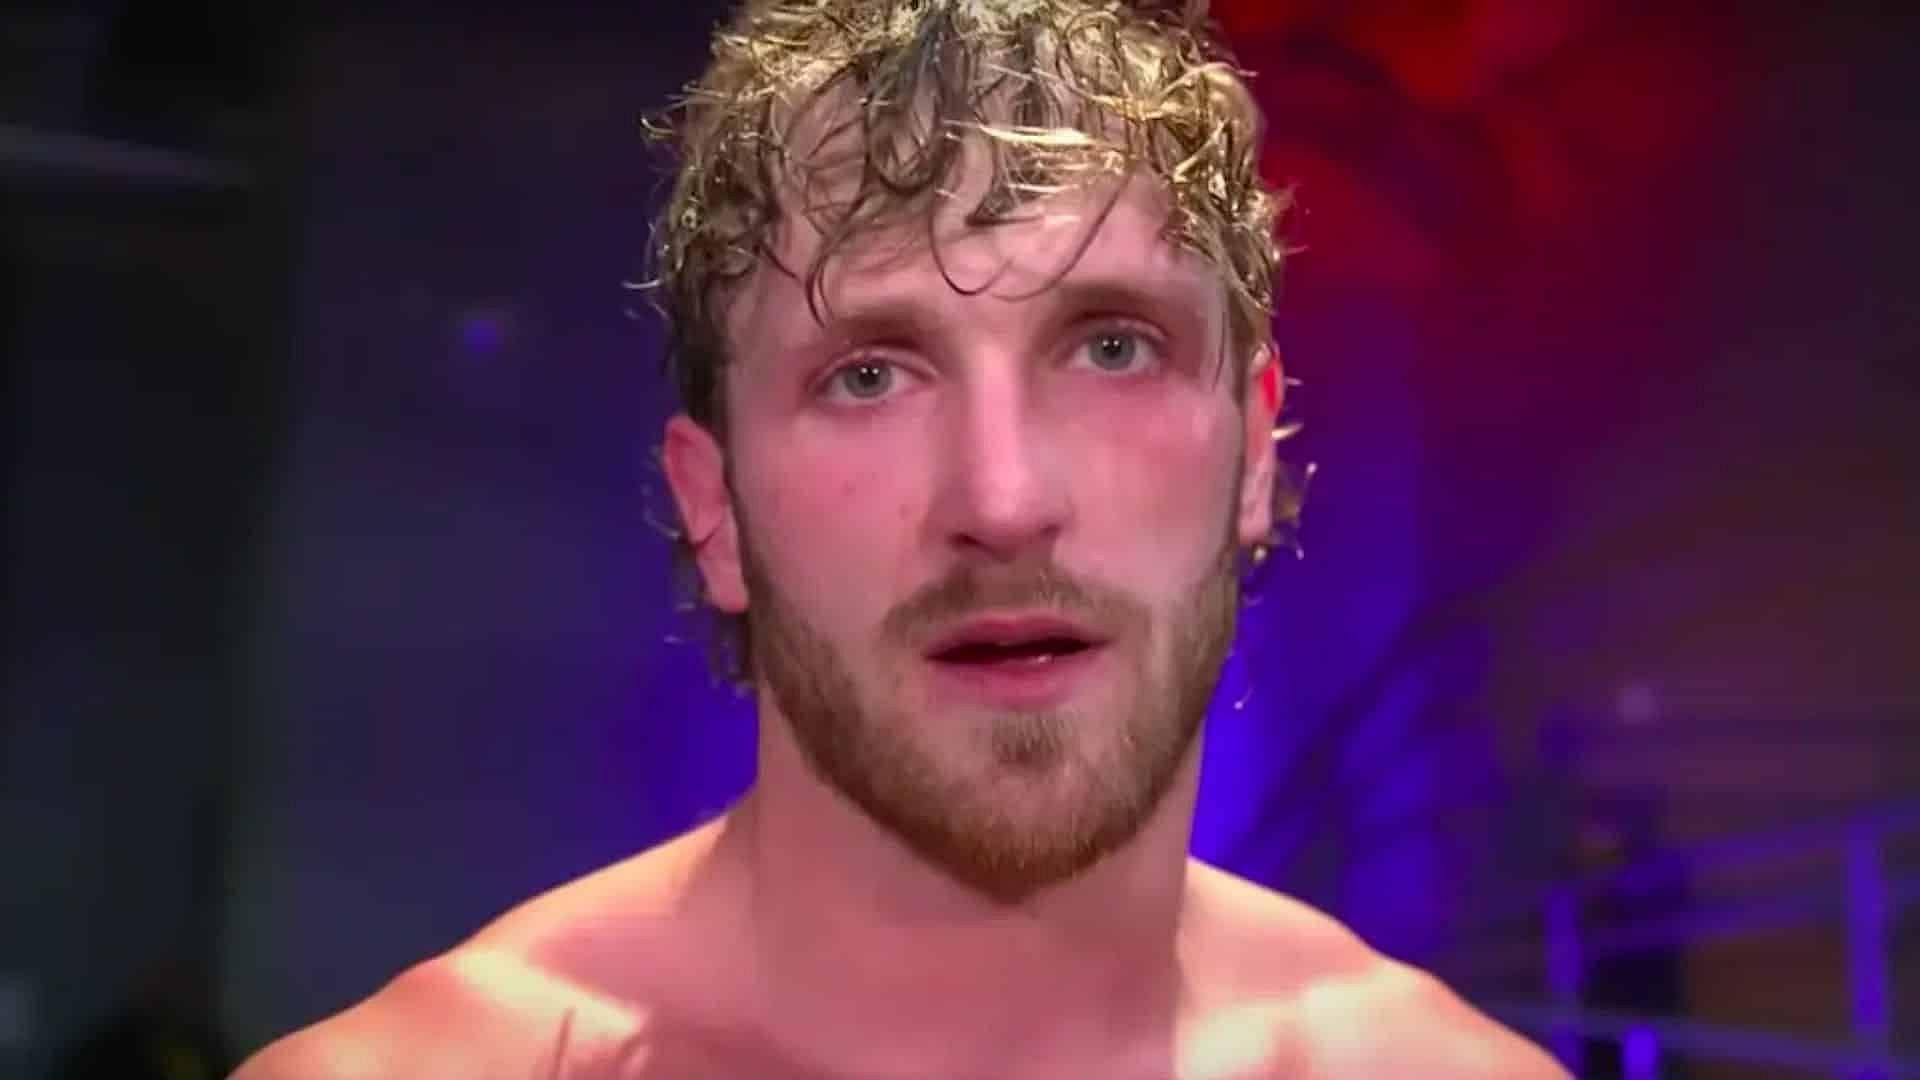 Logan Paul has become a mainstay in WWE